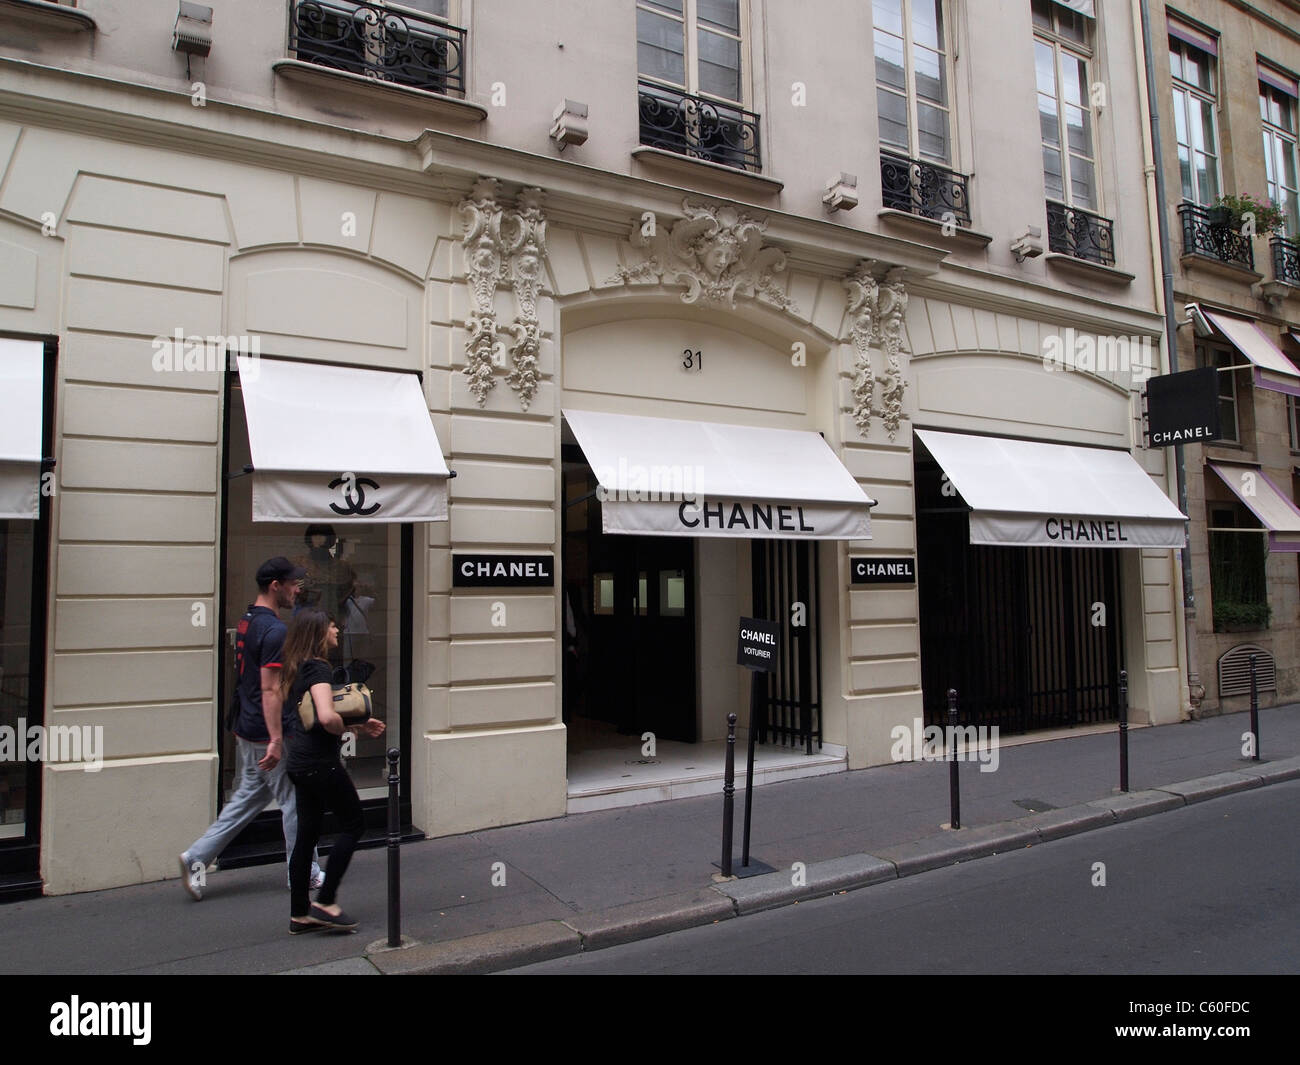 The famous Chanel shop Rue Cambon in Paris, France. This fashion shop founded by Coco Chanel in Stock Photo Alamy